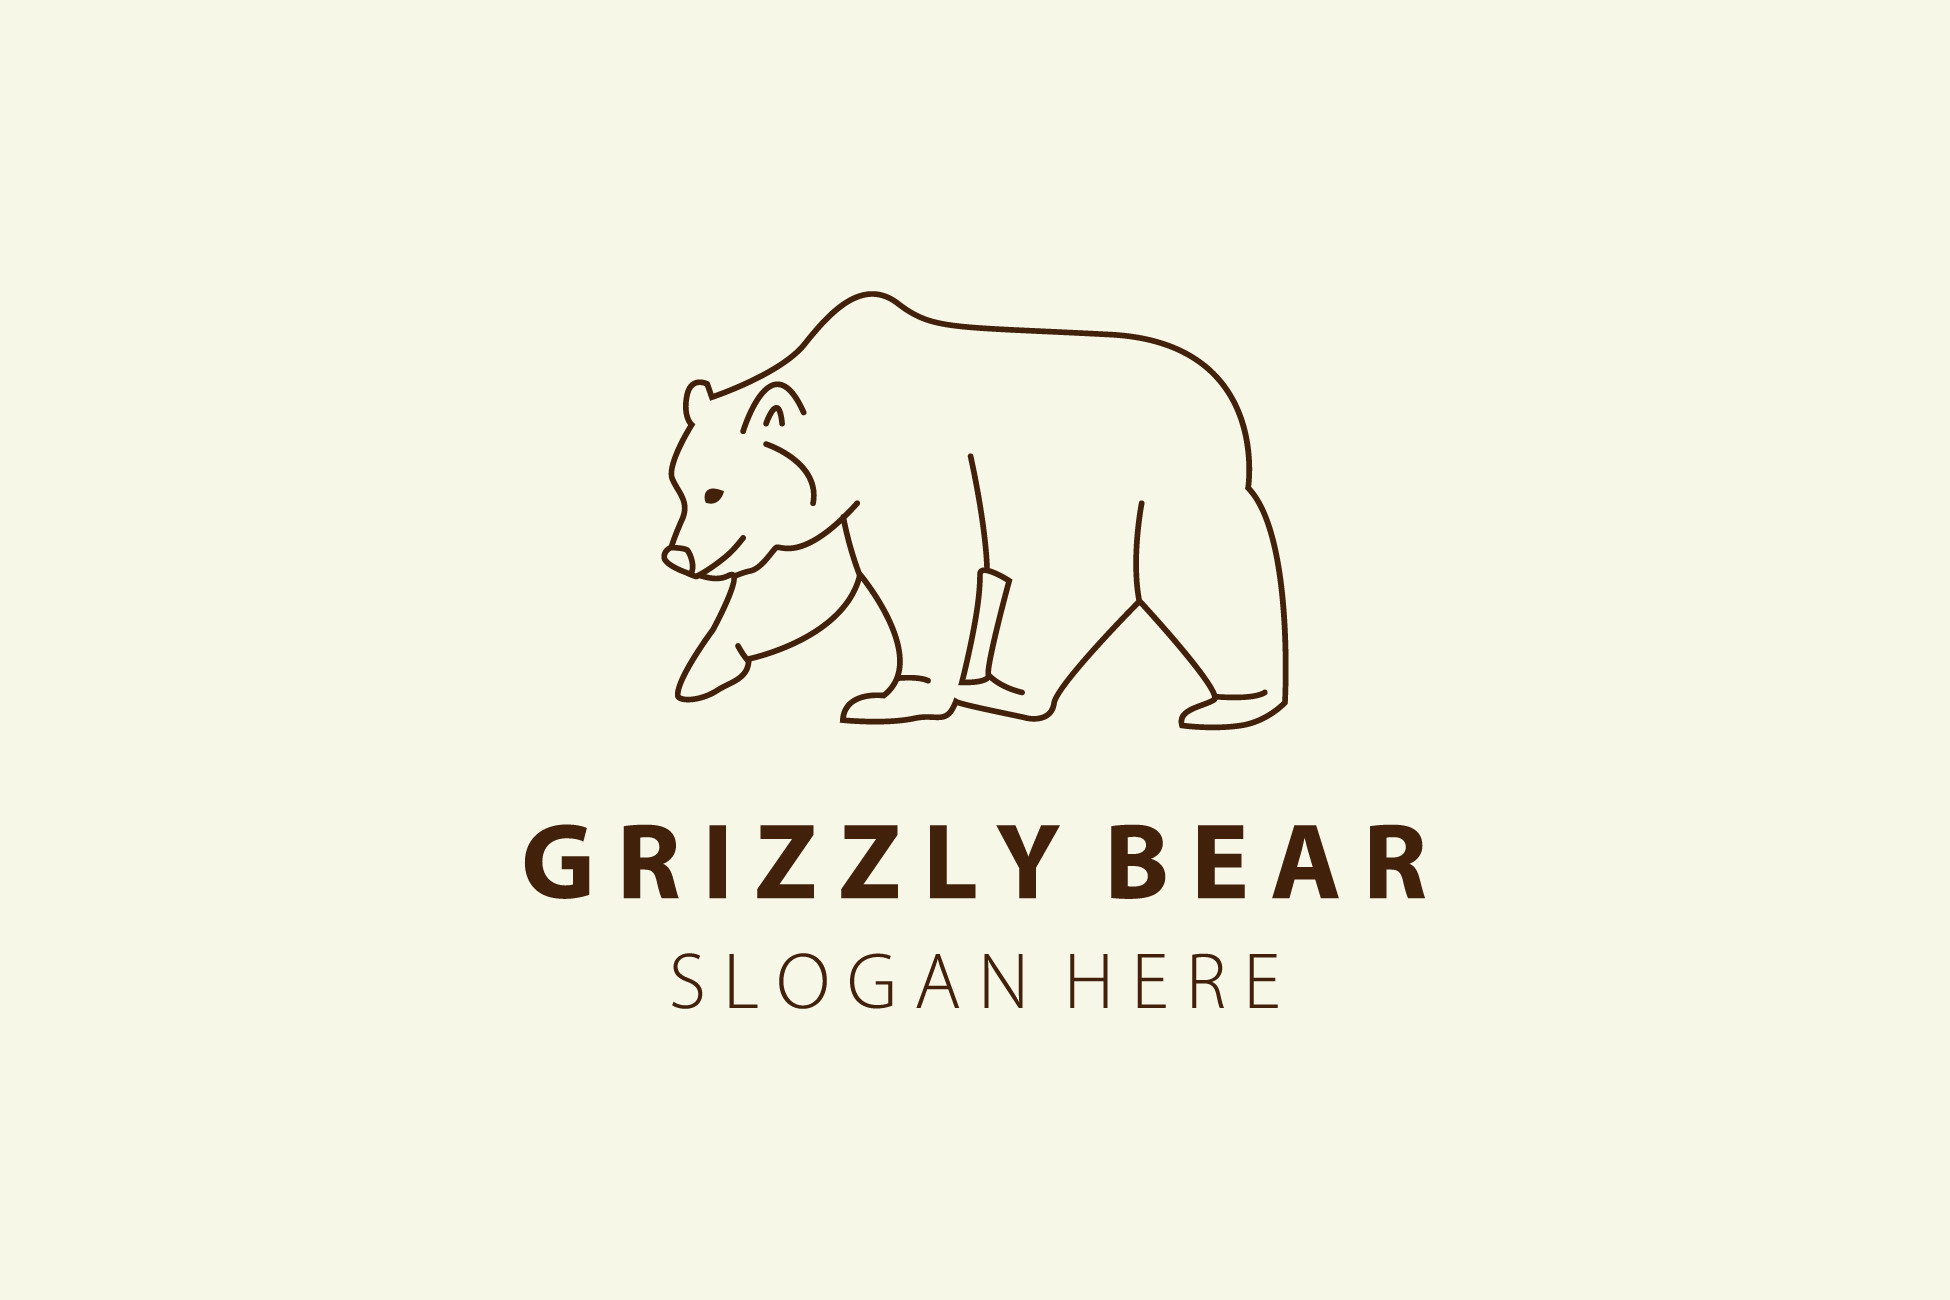 Grizzlybear Projects  Photos, videos, logos, illustrations and